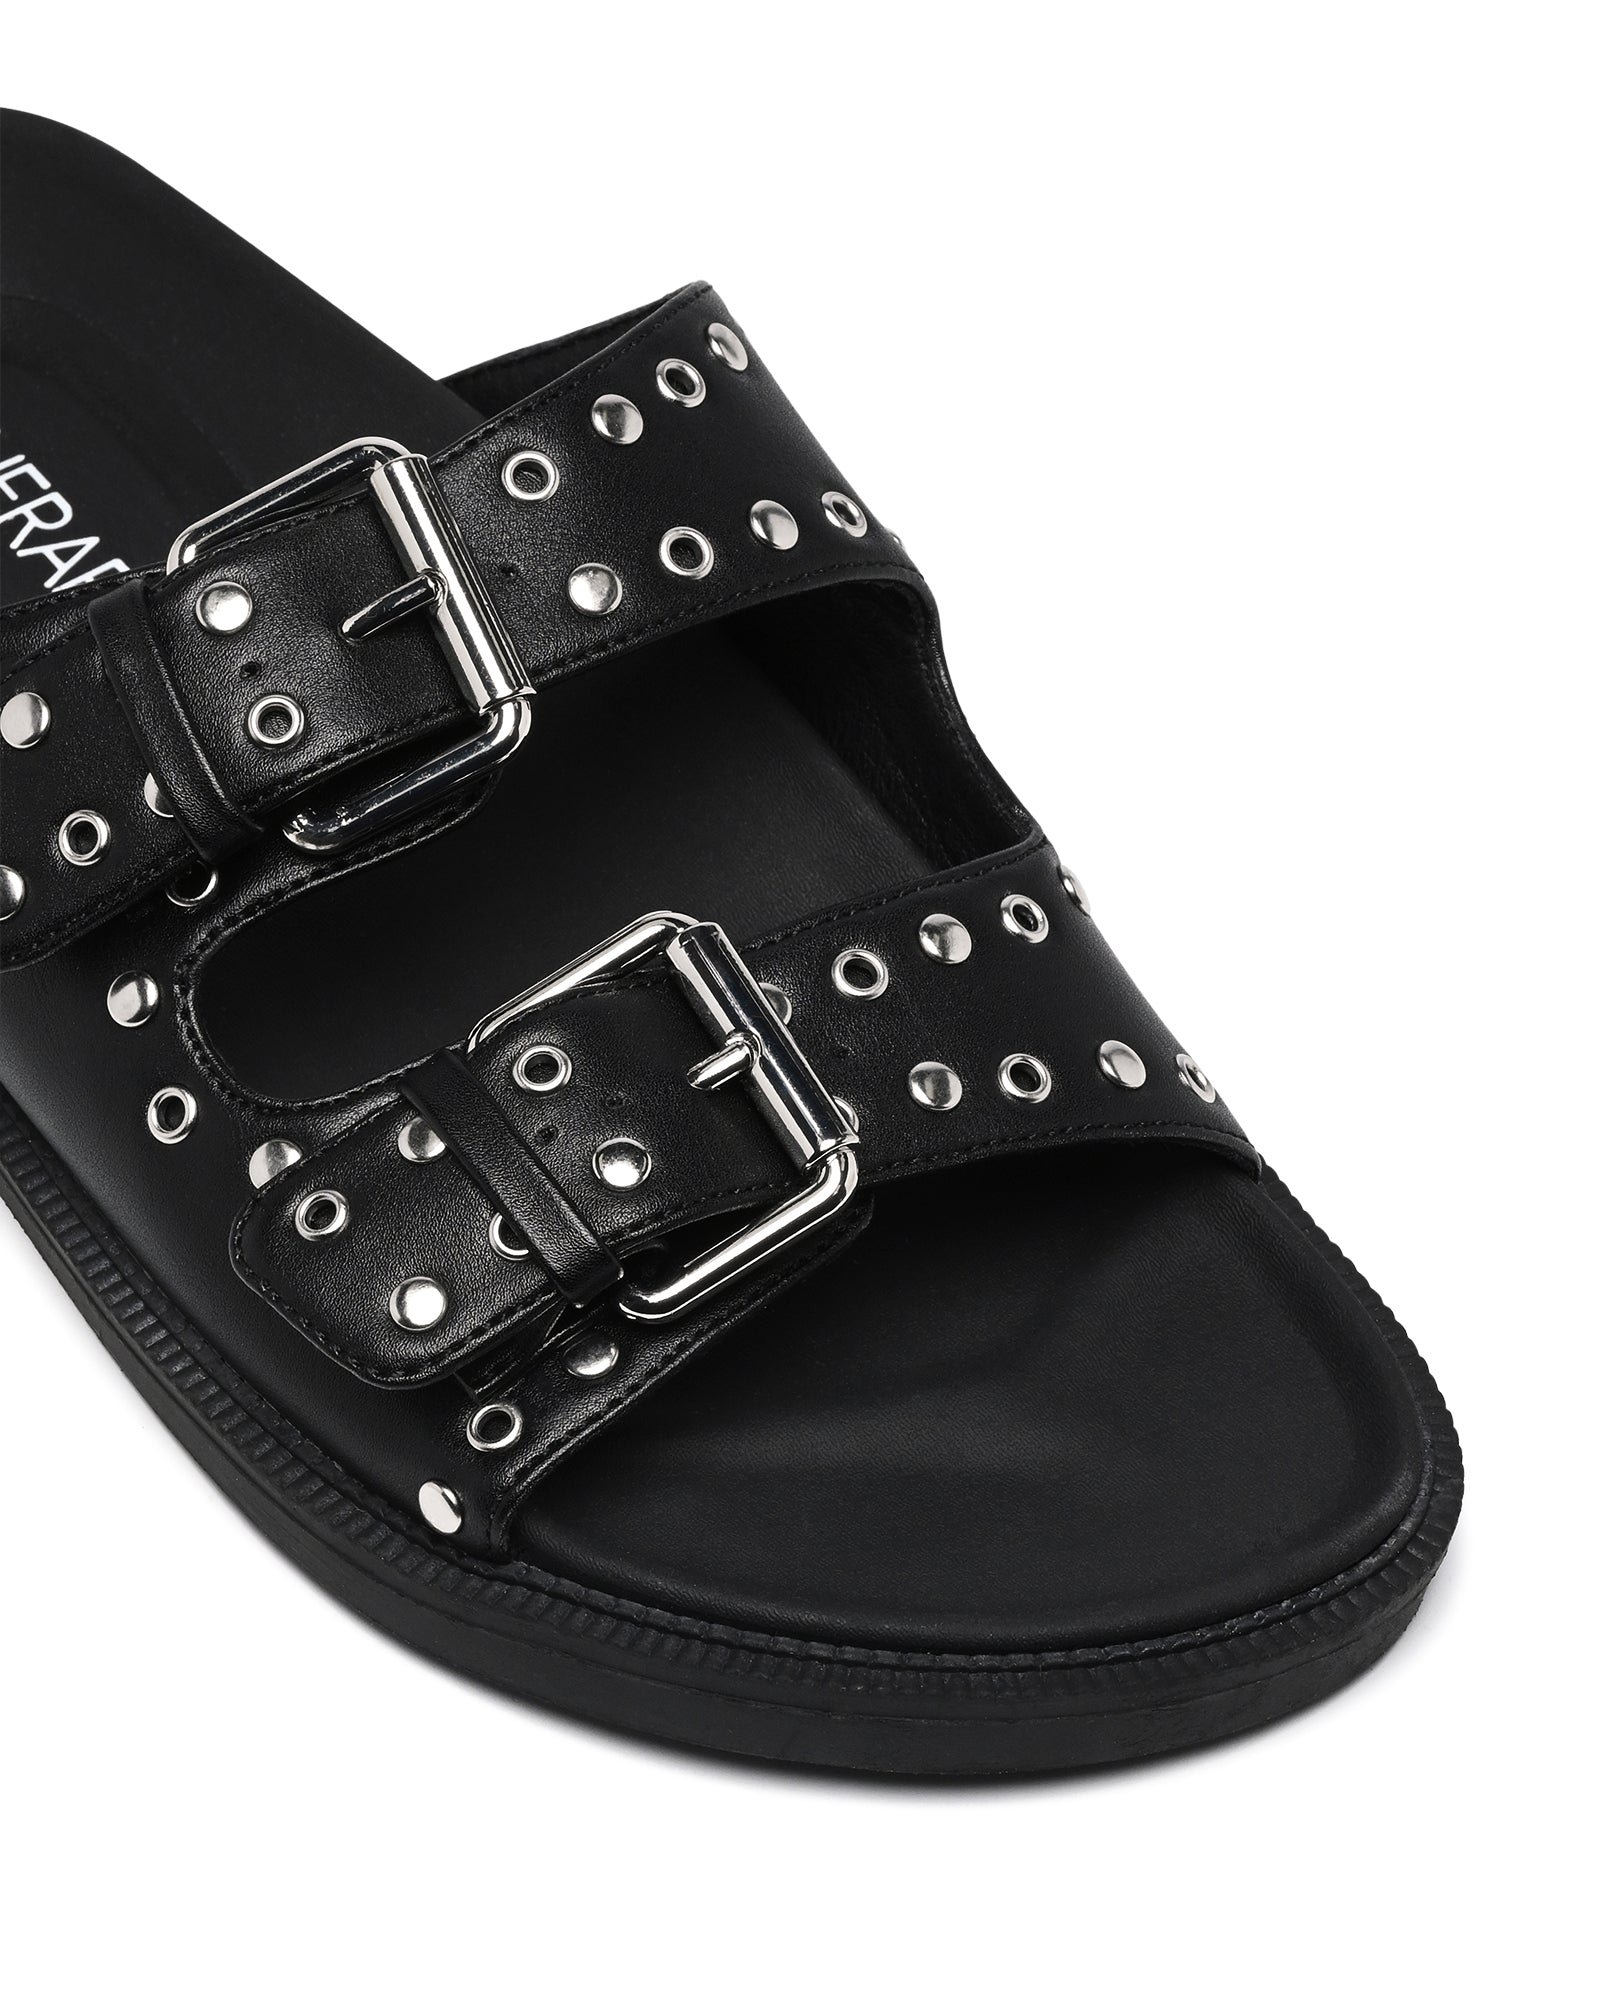 Therapy Shoes Ellery Black Smooth | Women's Sandals | Slides | Flats 